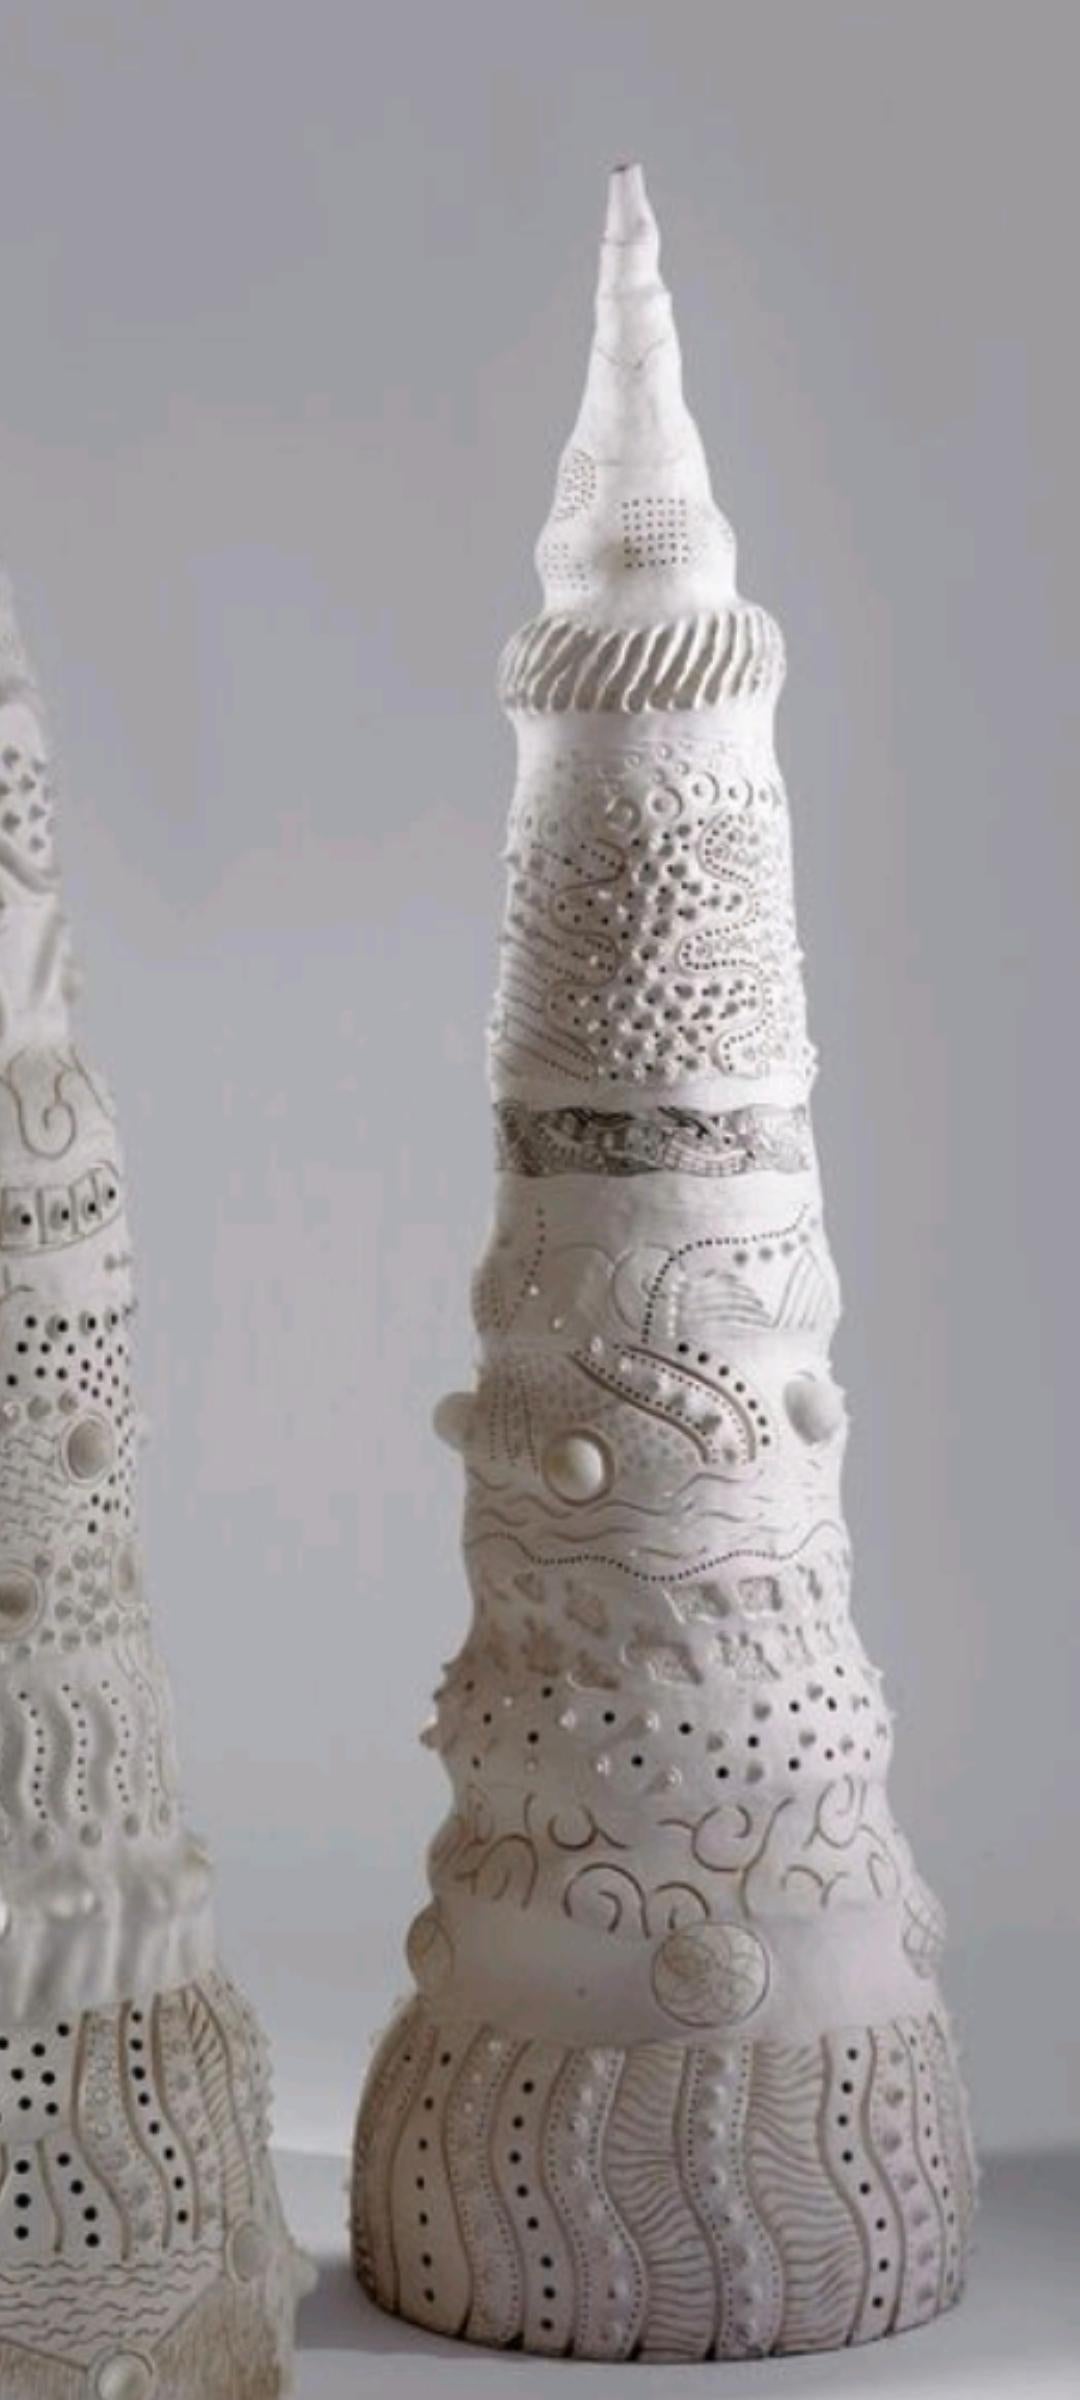 From Israel come these outstanding ceramic pieces, reminiscent of the Tower of Babel from the Bible.
They are the last pieces produced by Dodi Eldar, a very sensitive and skillful ceramicist who retired a few years ago. His treatment of the